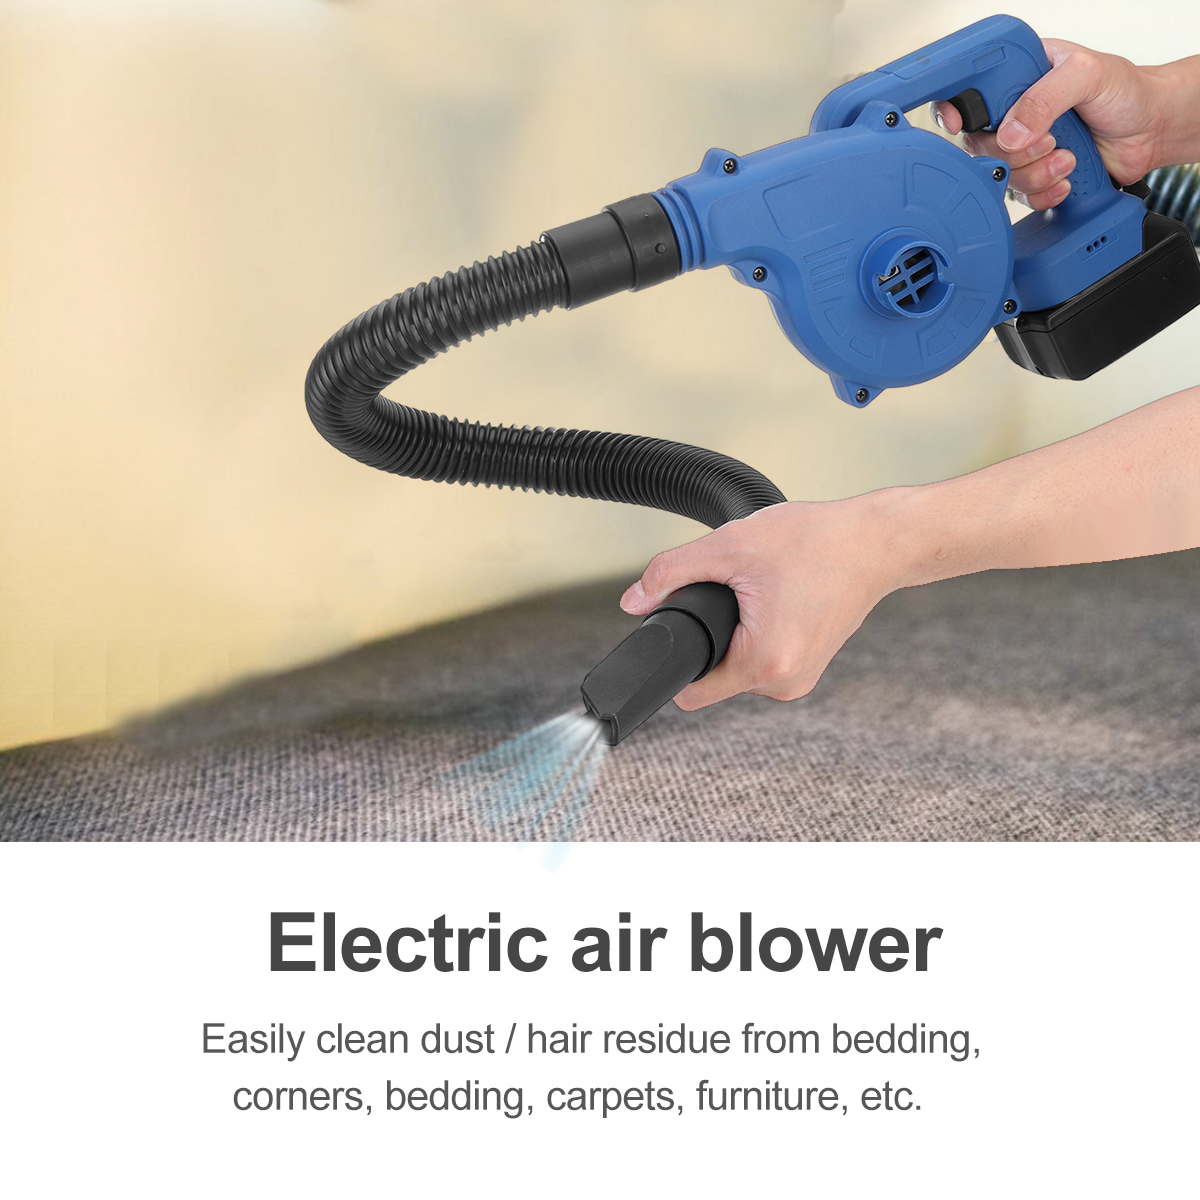 2-IN-1-Electric-Air-Blower-Kit-Cleaner-Wireless-Air-Fan-Dust-Blowing-Computer-Dust-Collector-Adapted-1838499-4